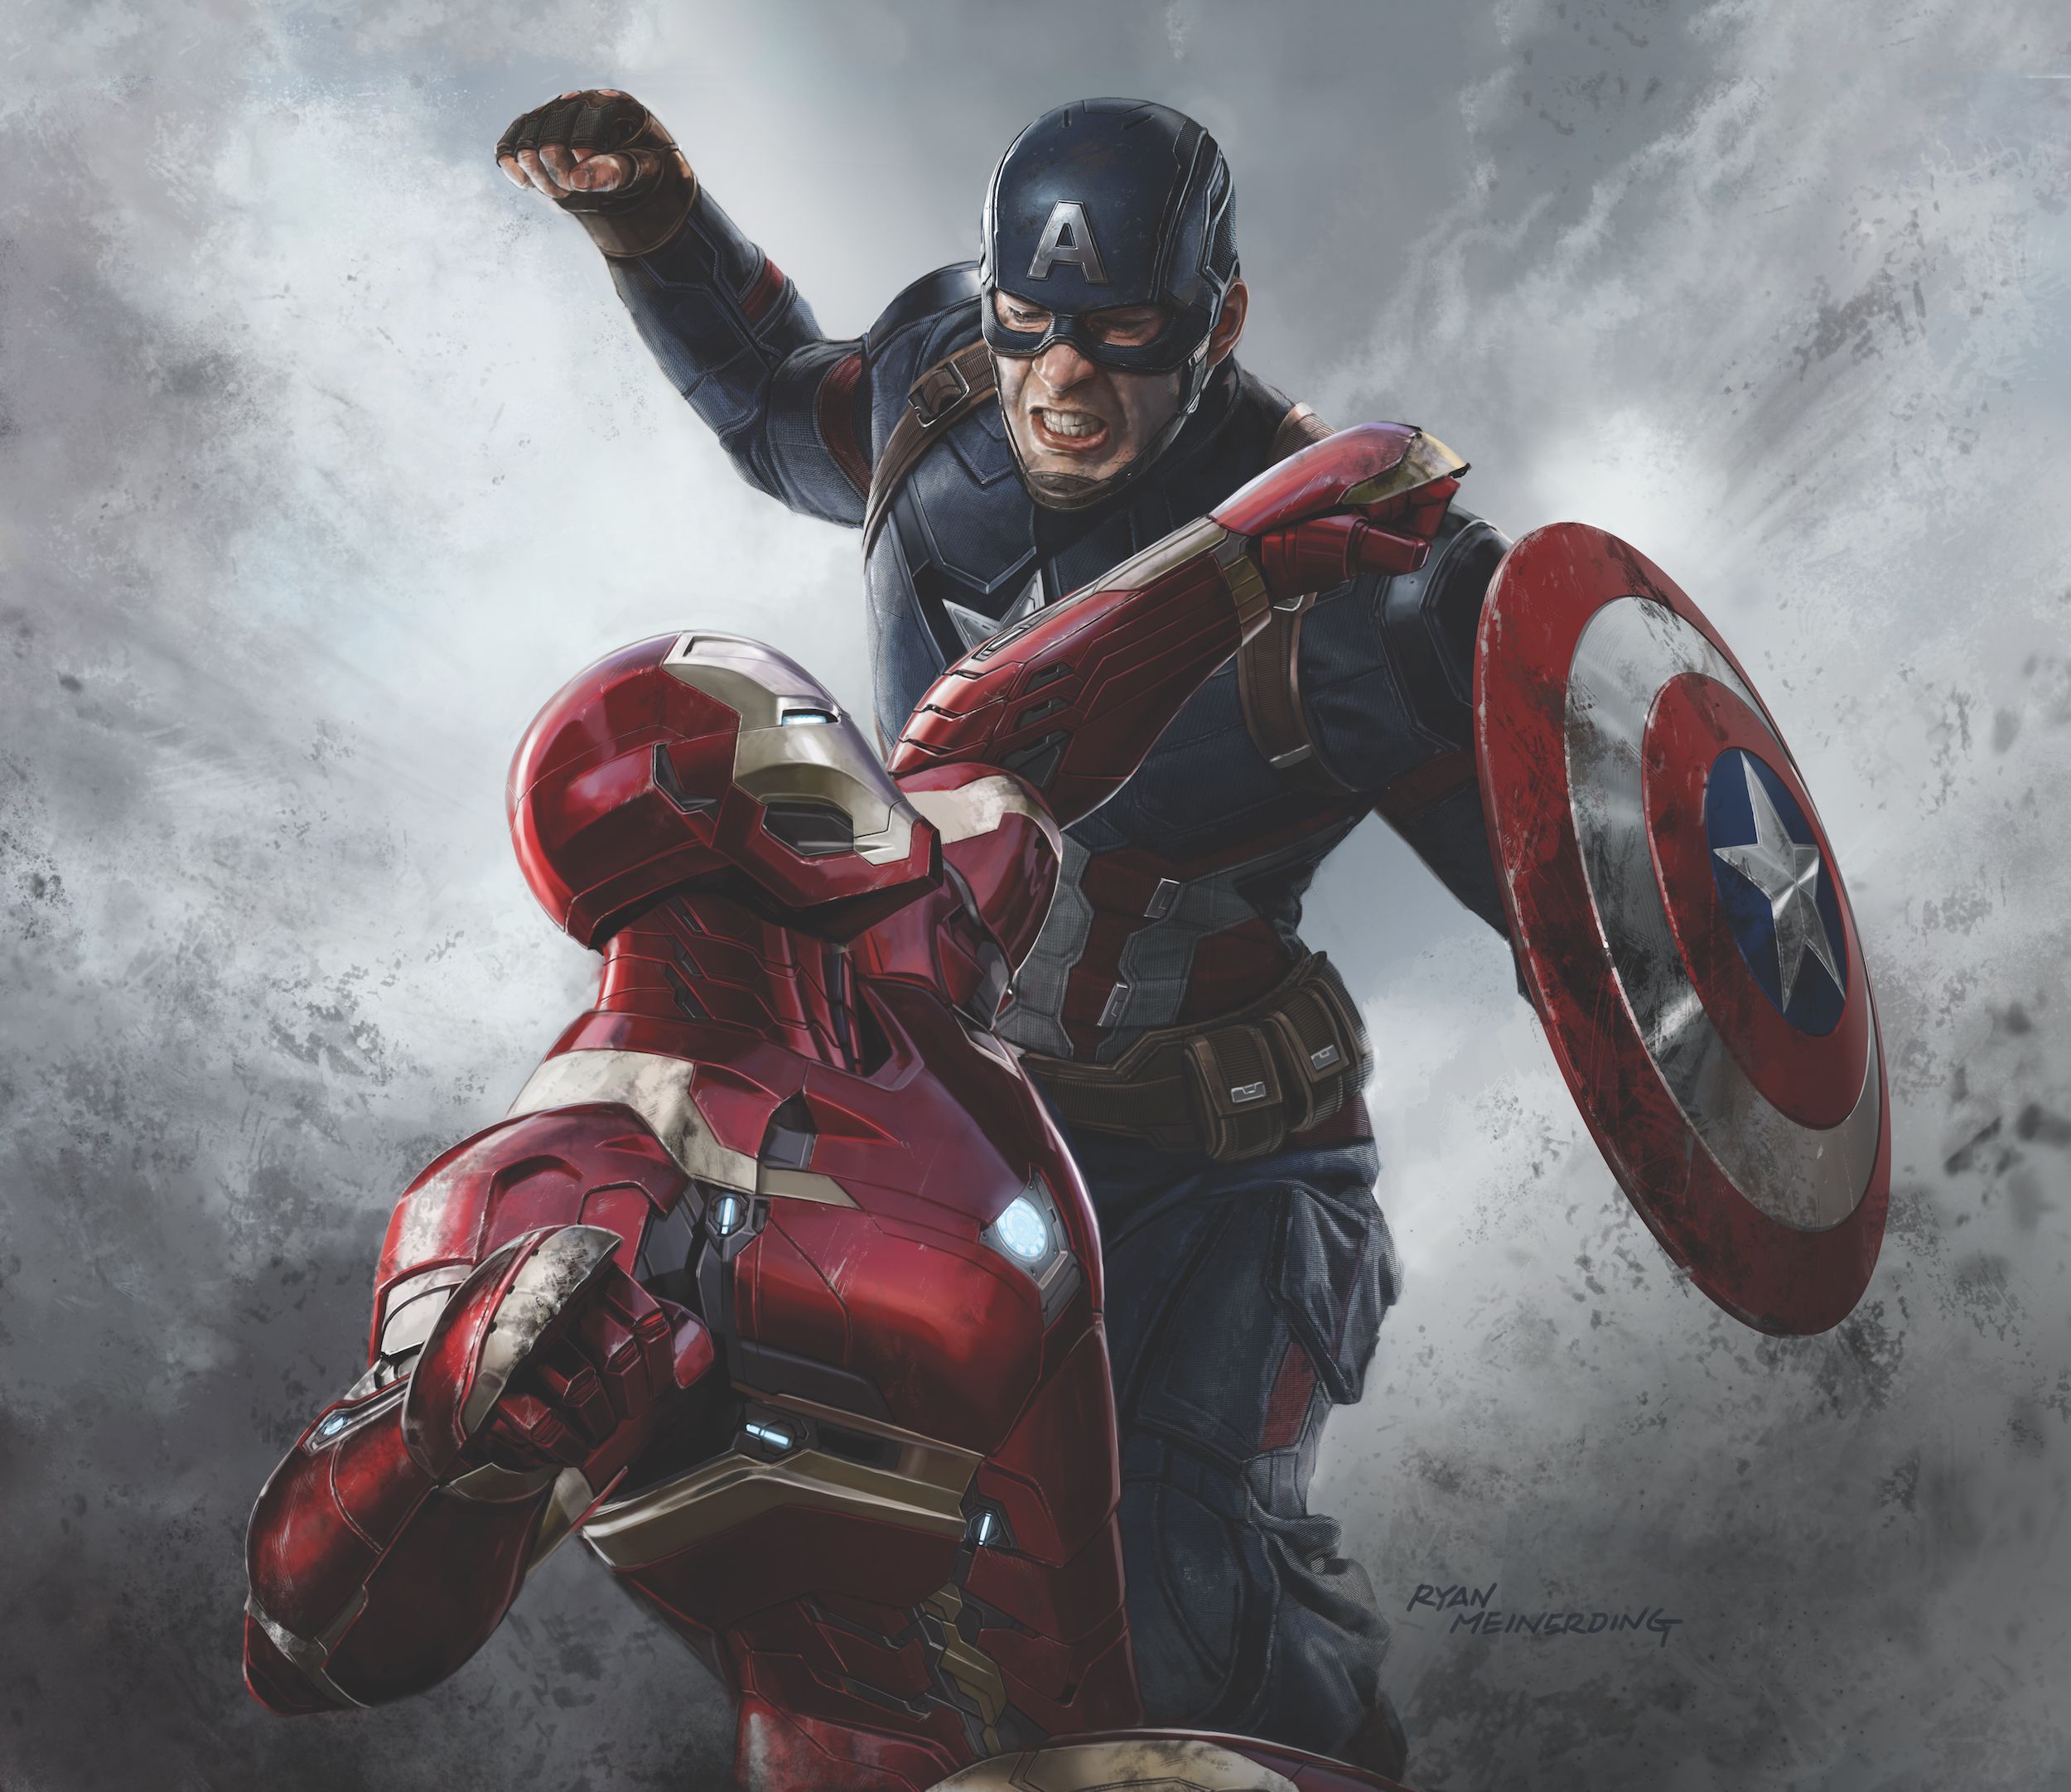 Captain America: Civil War': 15 New Concept Art Image Showcase Key Moments and Alt Designs!! Check It Out!!. Welcome to Moviz Ark!